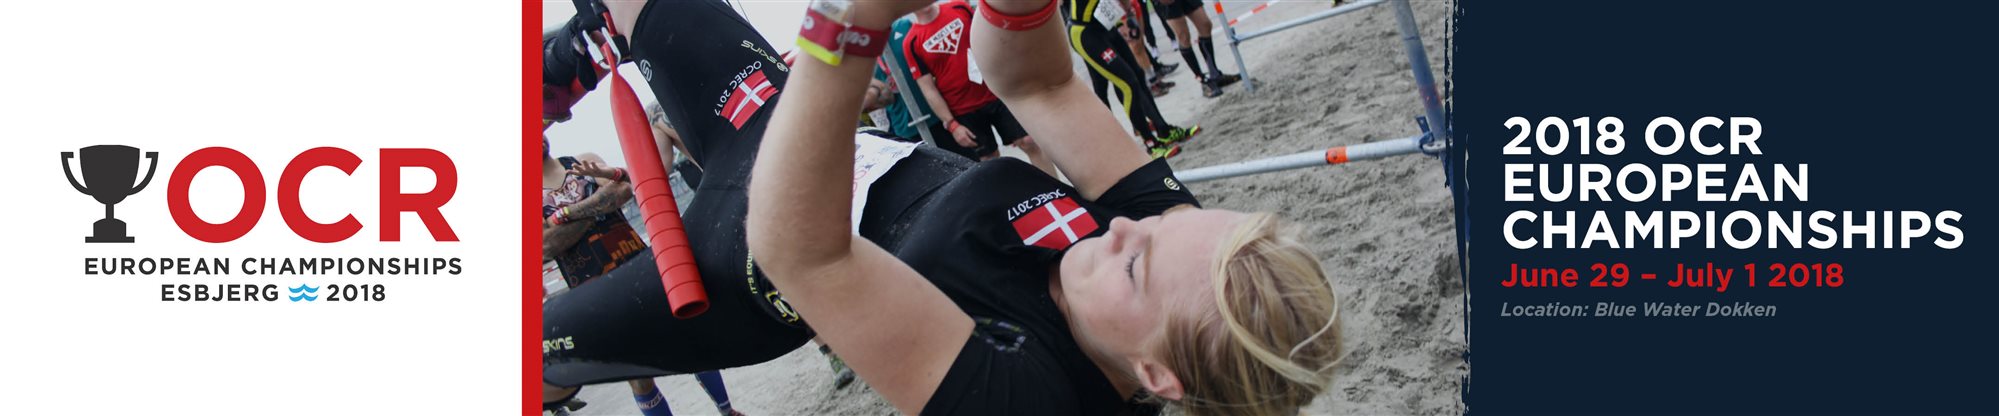 The 2018 OCR European Championships